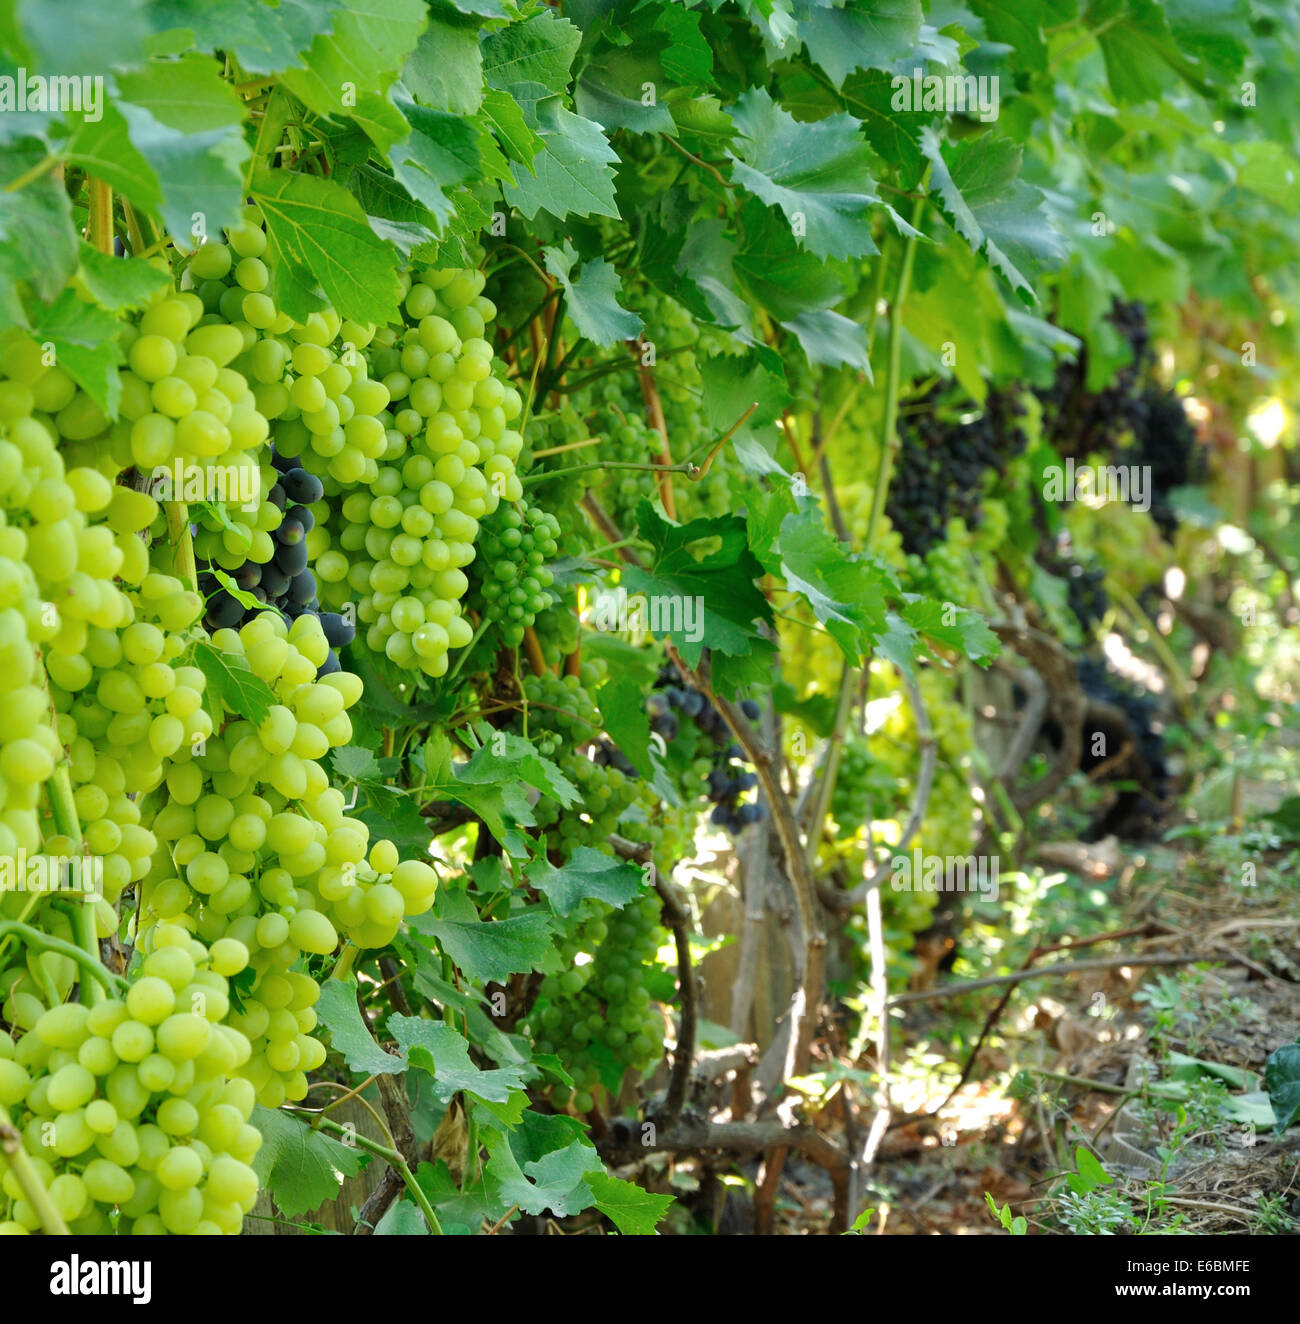 plantation of blue and green grape full of ripe fruits Stock Photo